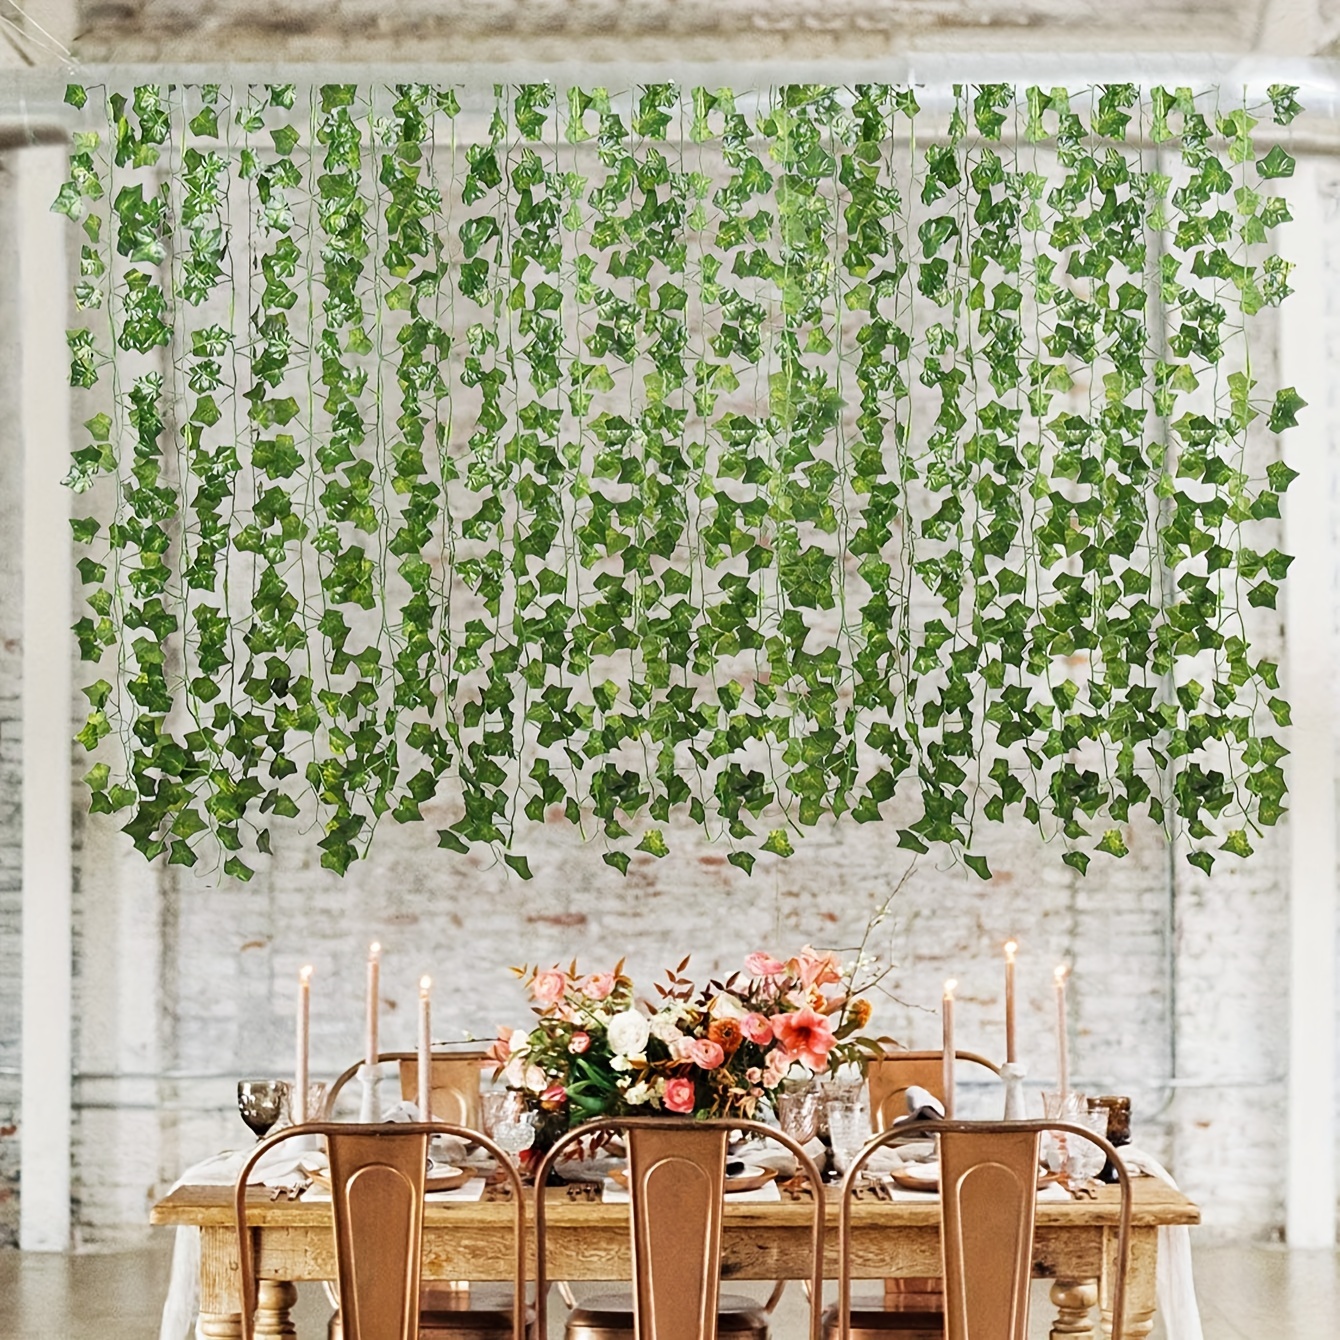 12Pcs Artificial Ivy Wreath Fake Vine Plant Hanging Leaves Wedding Fence  Green Decoration Wreath 2M Home